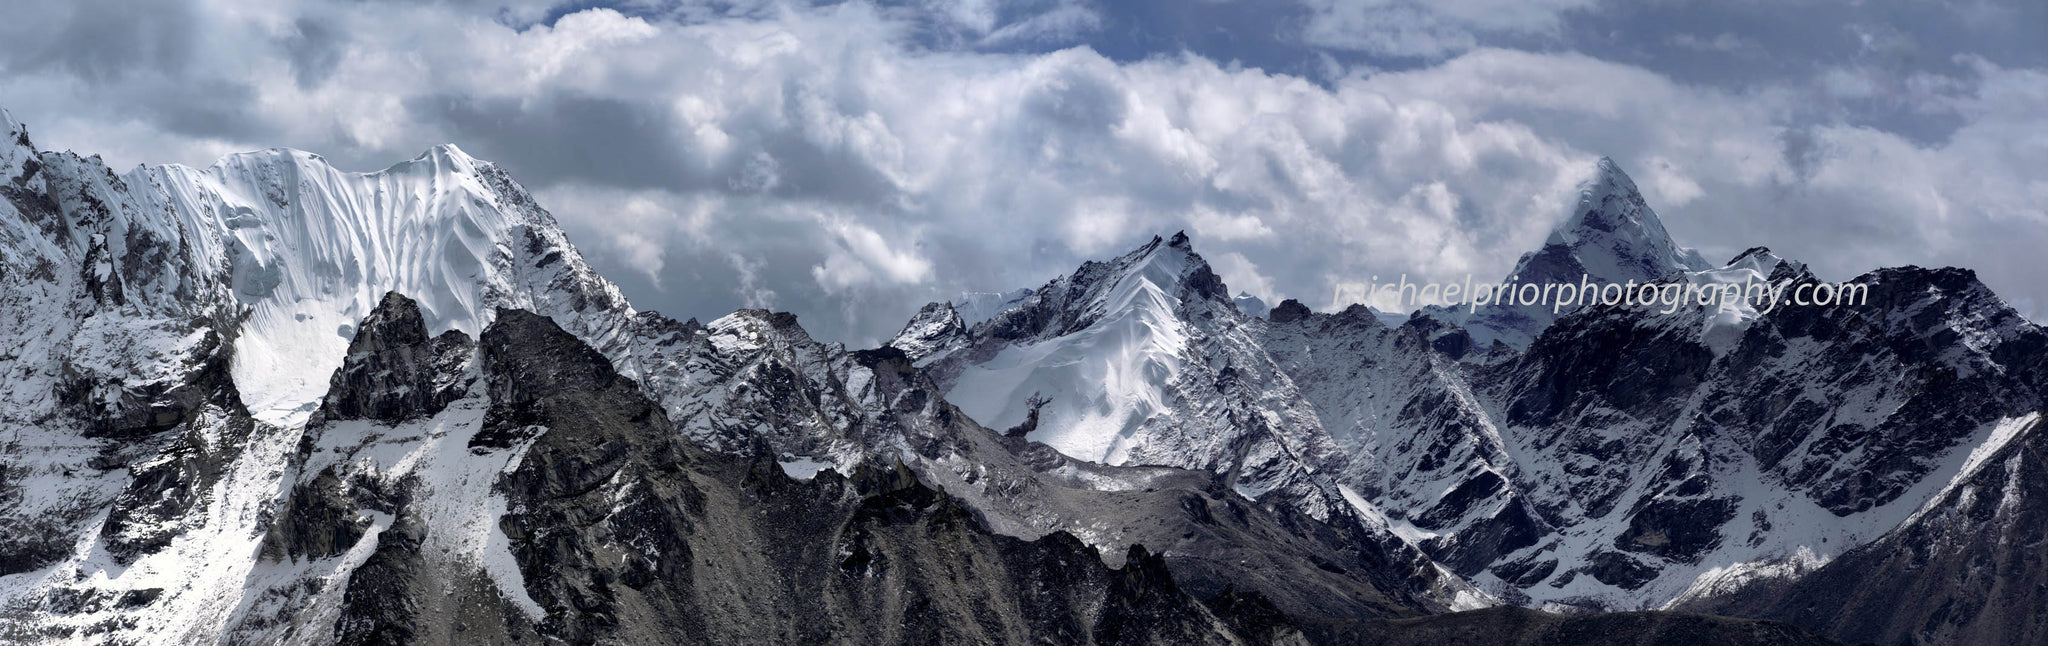 The Himalaya's With Ama Dablam On The Right. - Michael Prior Photography 